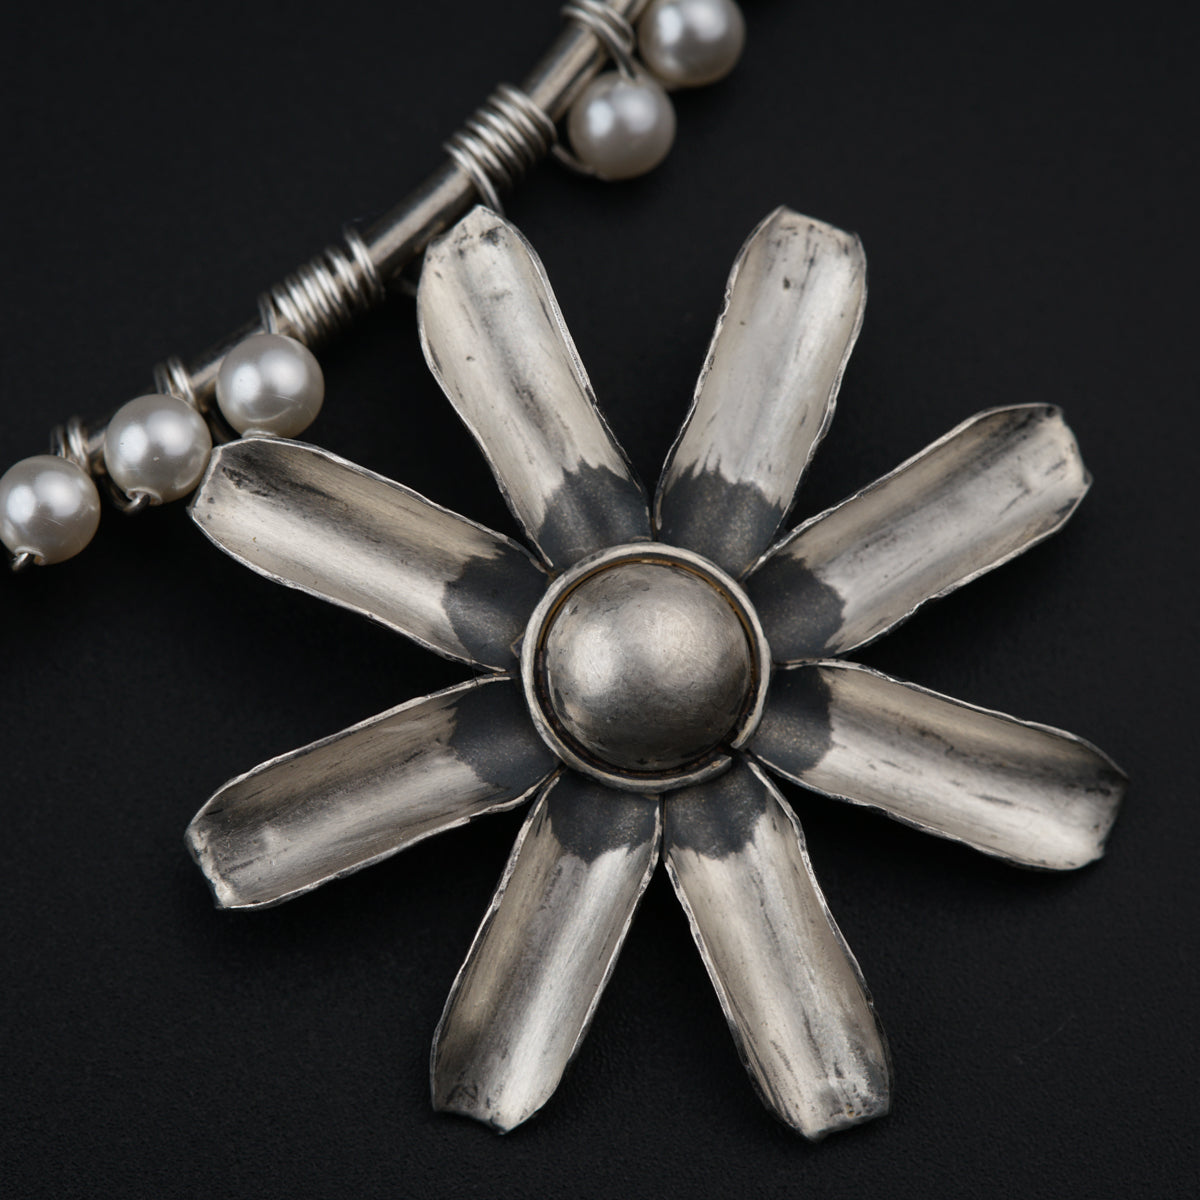 a silver necklace with pearls on a black background